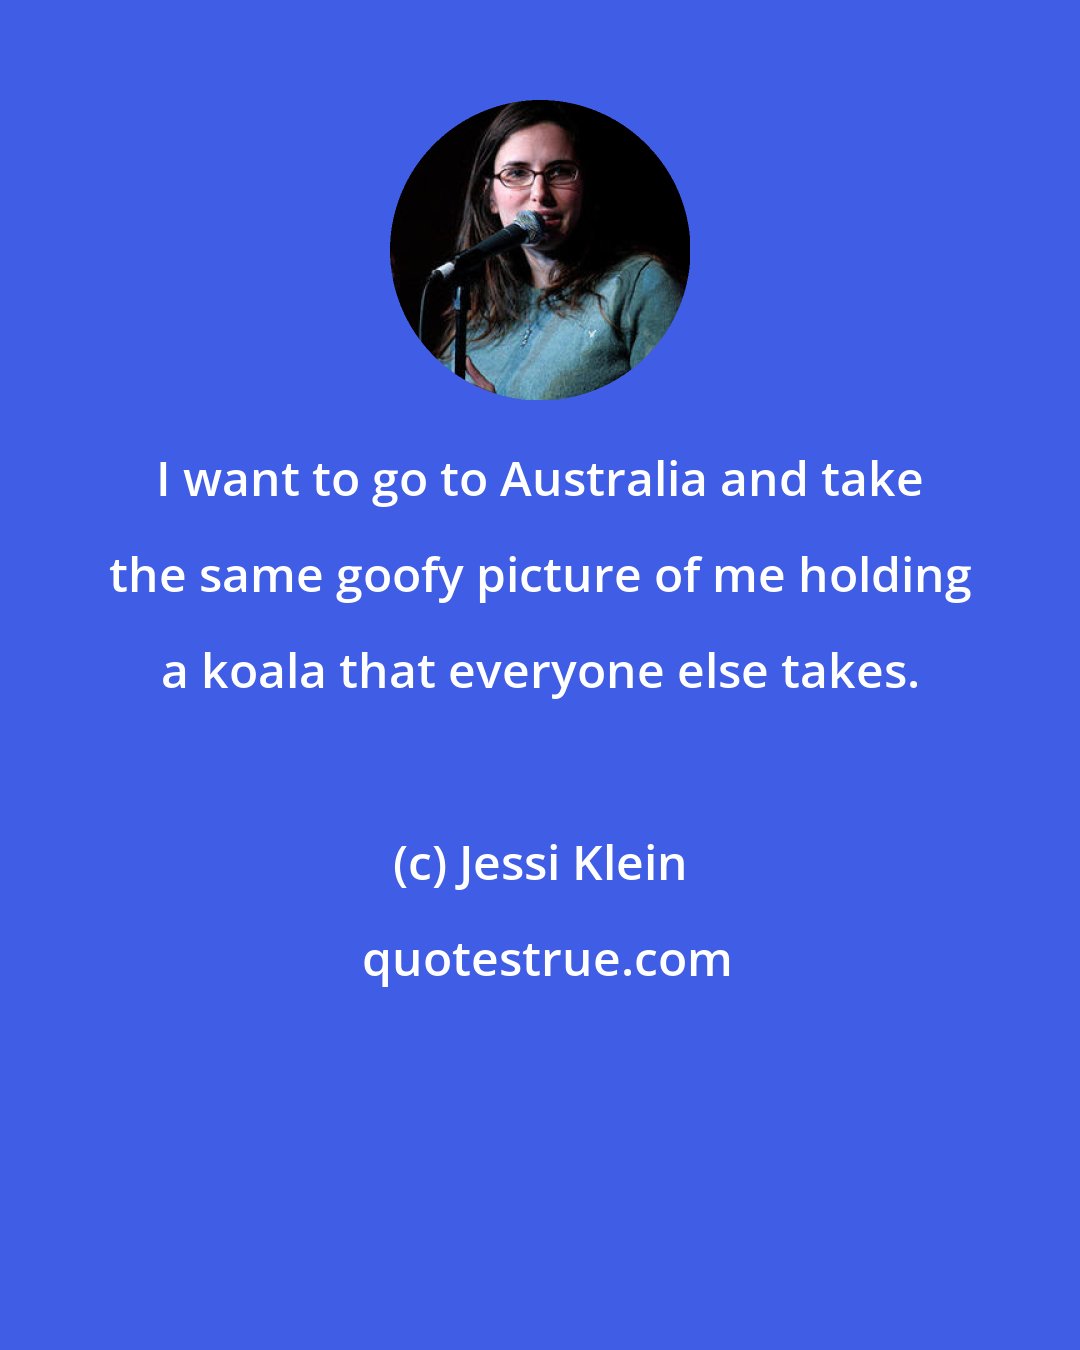 Jessi Klein: I want to go to Australia and take the same goofy picture of me holding a koala that everyone else takes.